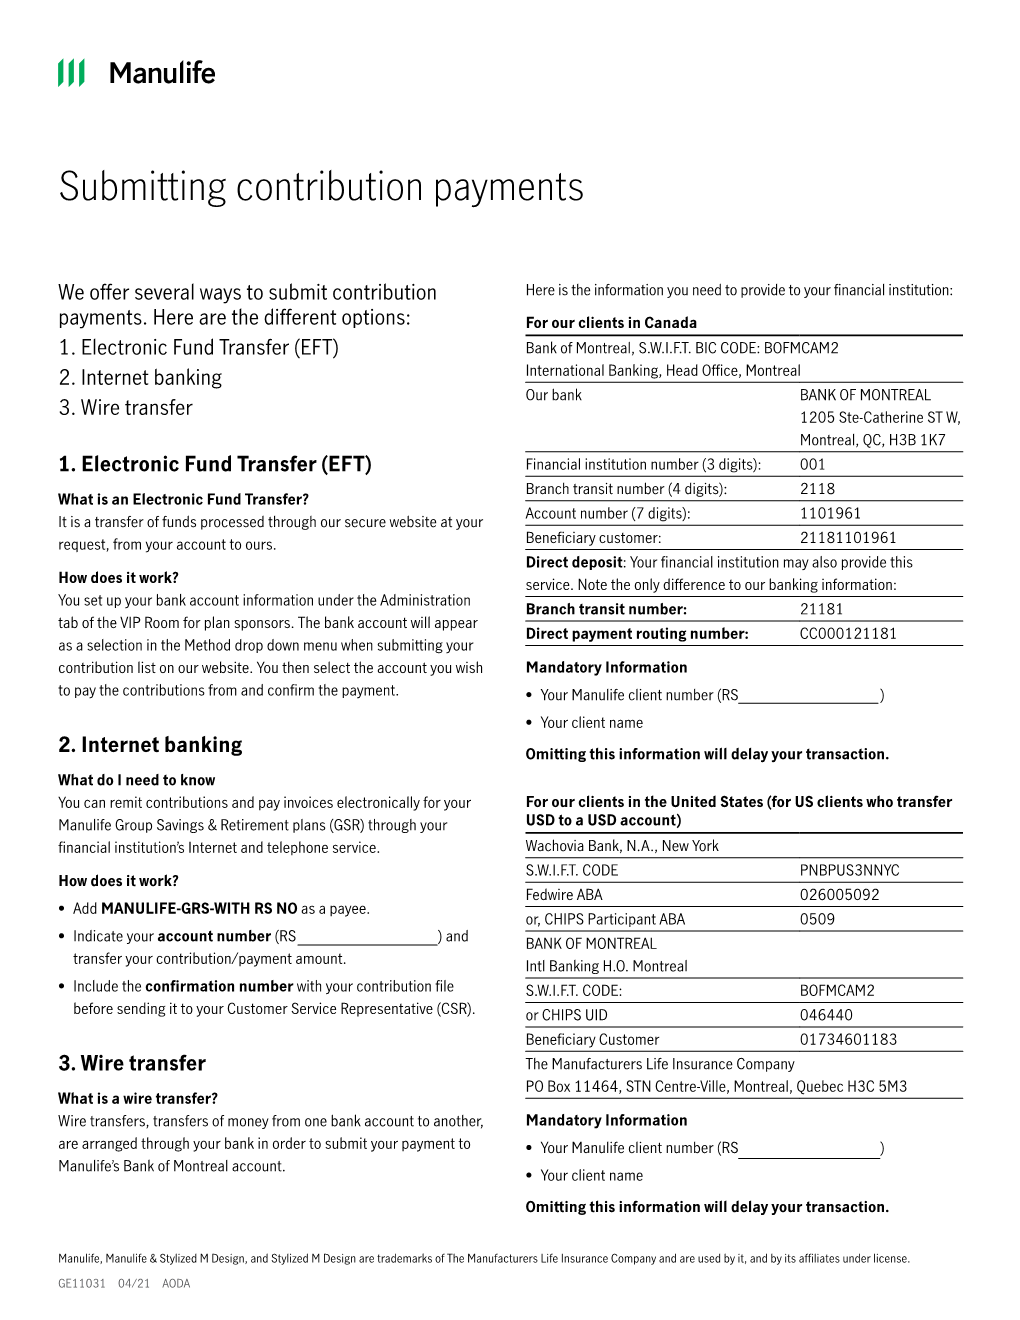 Submitting Contribution Payments